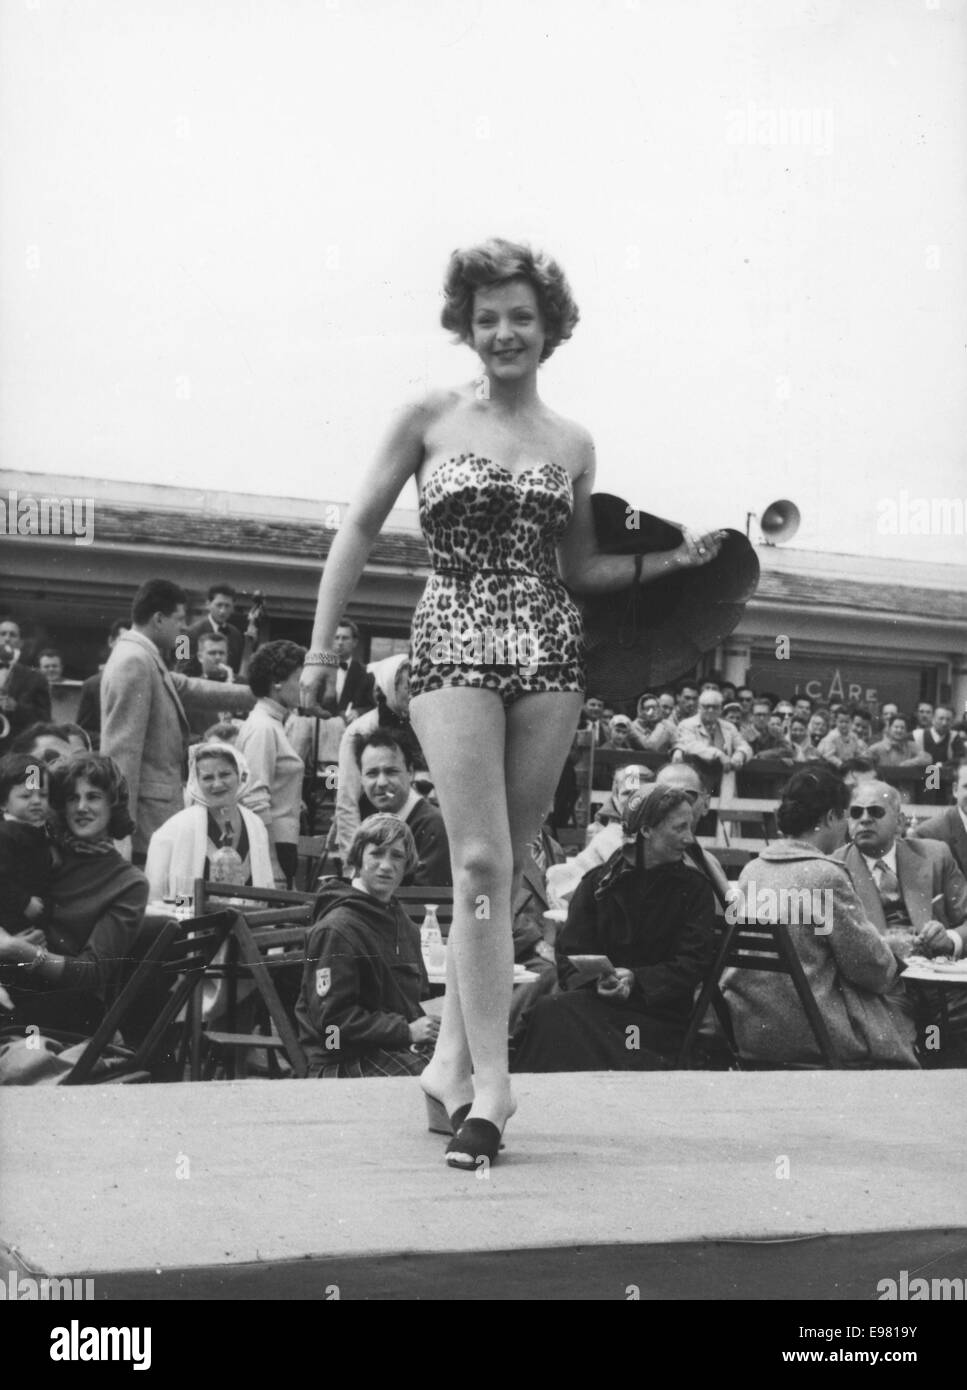 Deauville, France. 19th July, 1954. Brave Parisienne models wear pretty beach costumes despite rain and gale winds on a Deauville beach during a fashion show. © KEYSTONE Pictures/ZUMA Wire/ZUMAPRESS.com/Alamy Live News Stock Photo